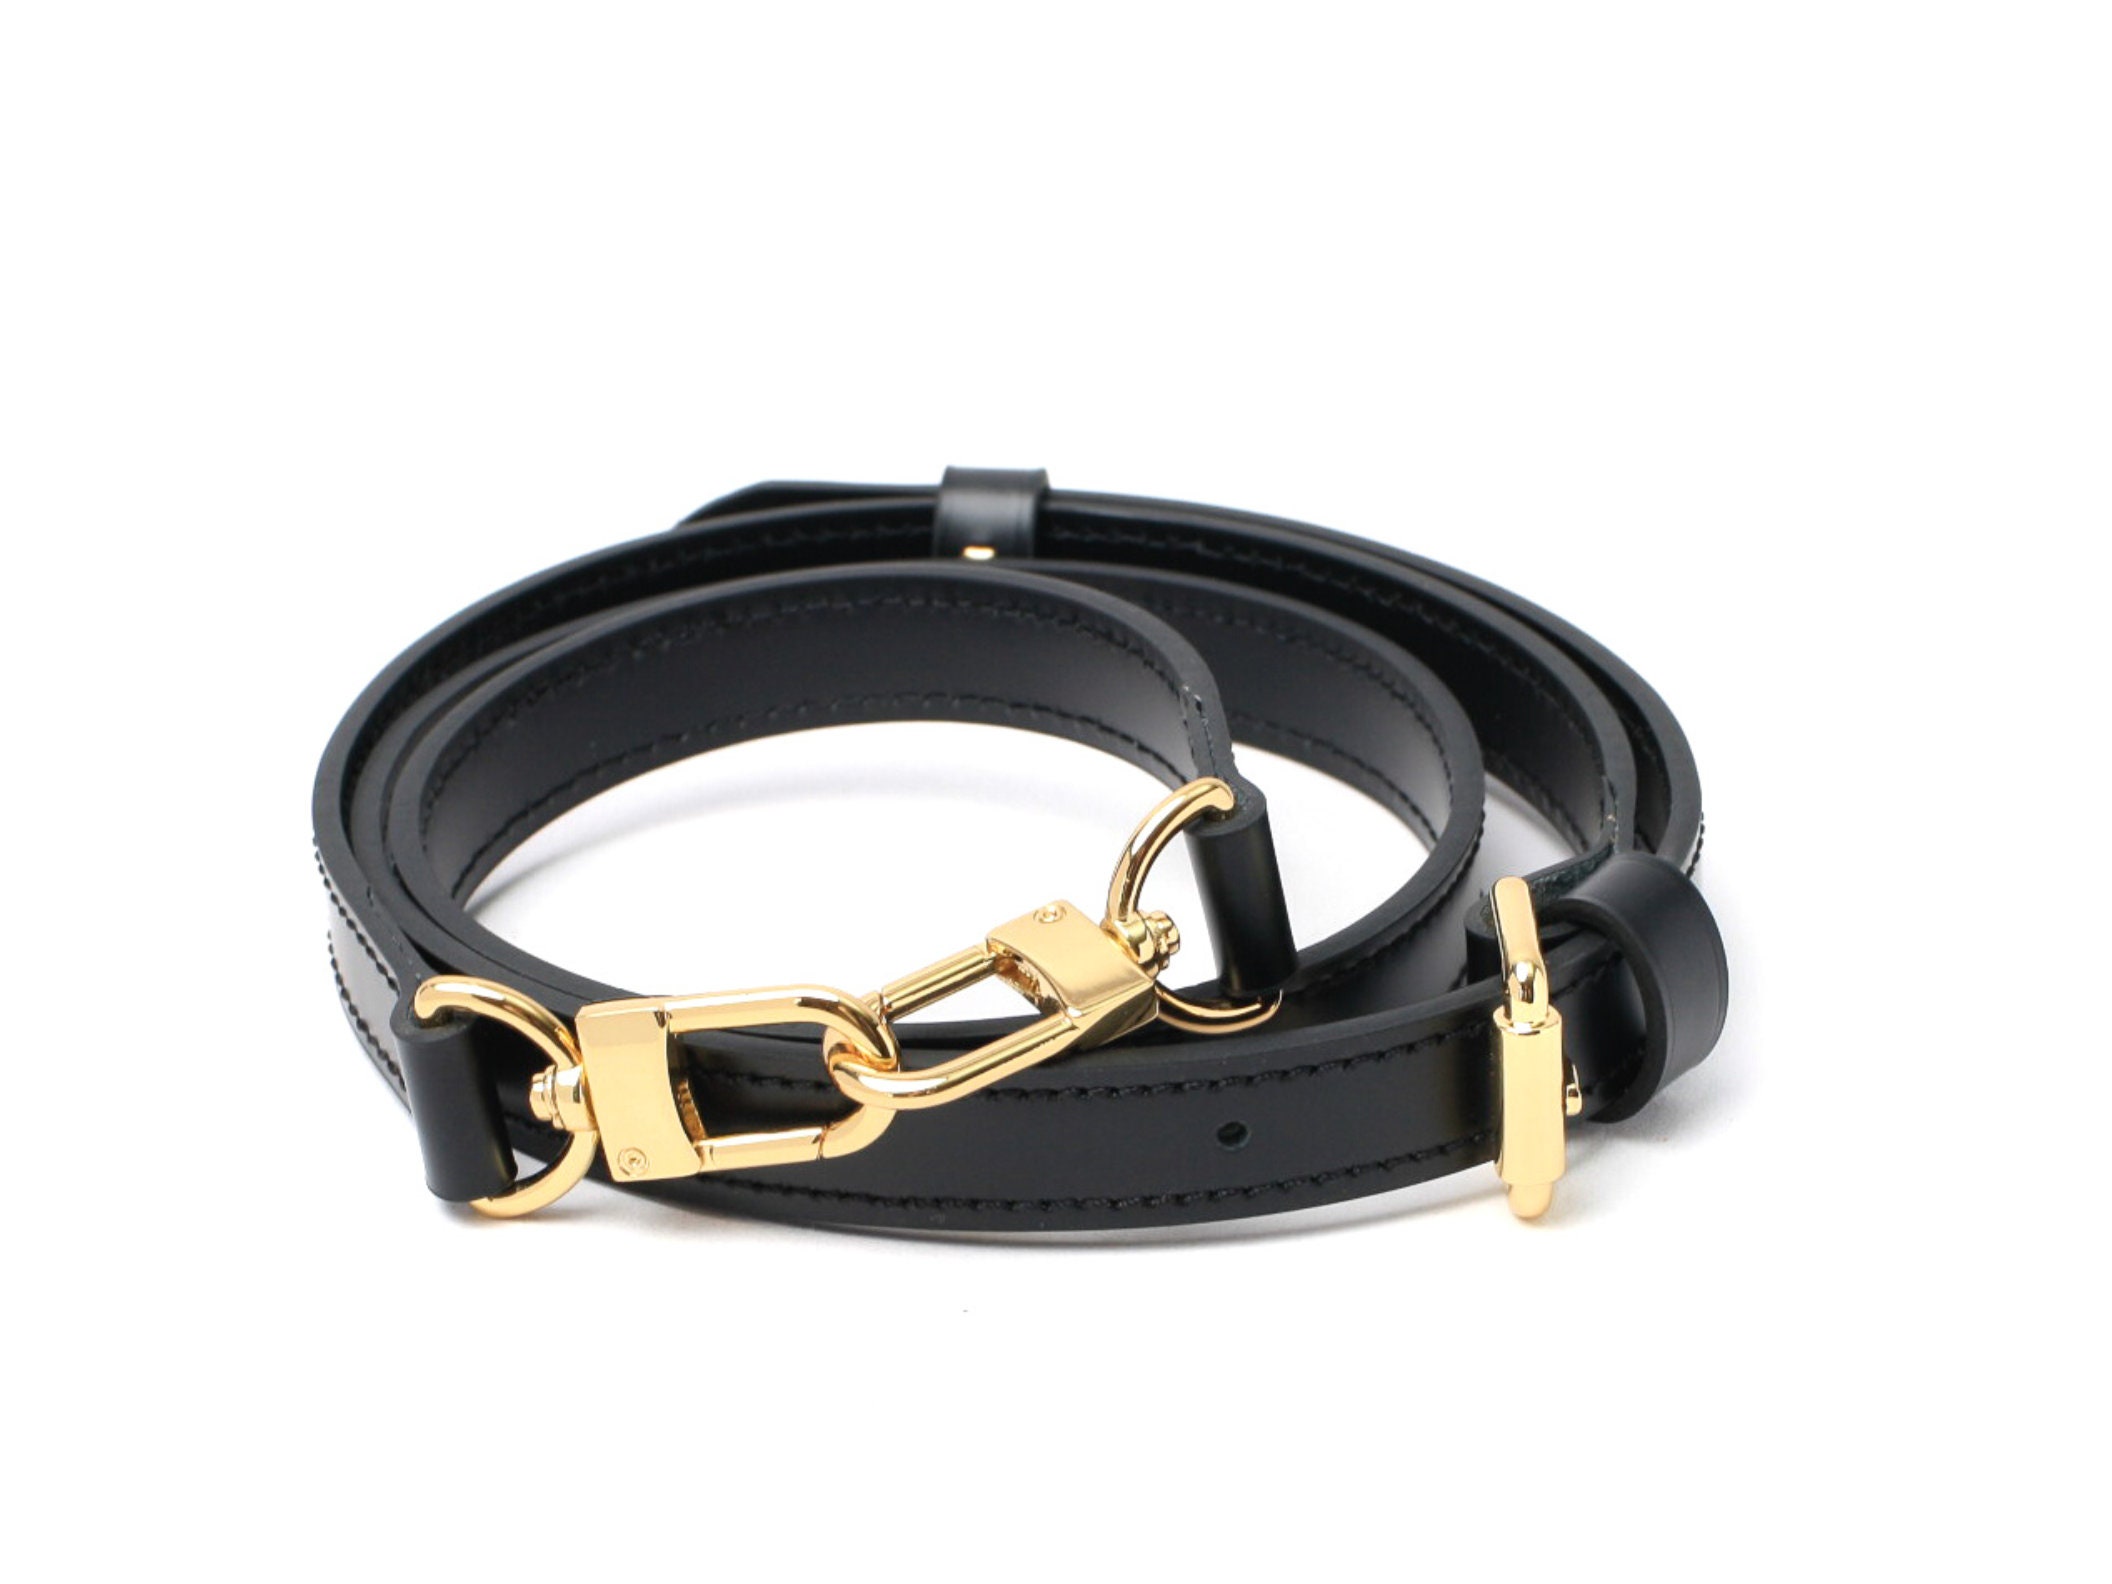 Buy Louis Vuitton Black Strap Online In India -  India